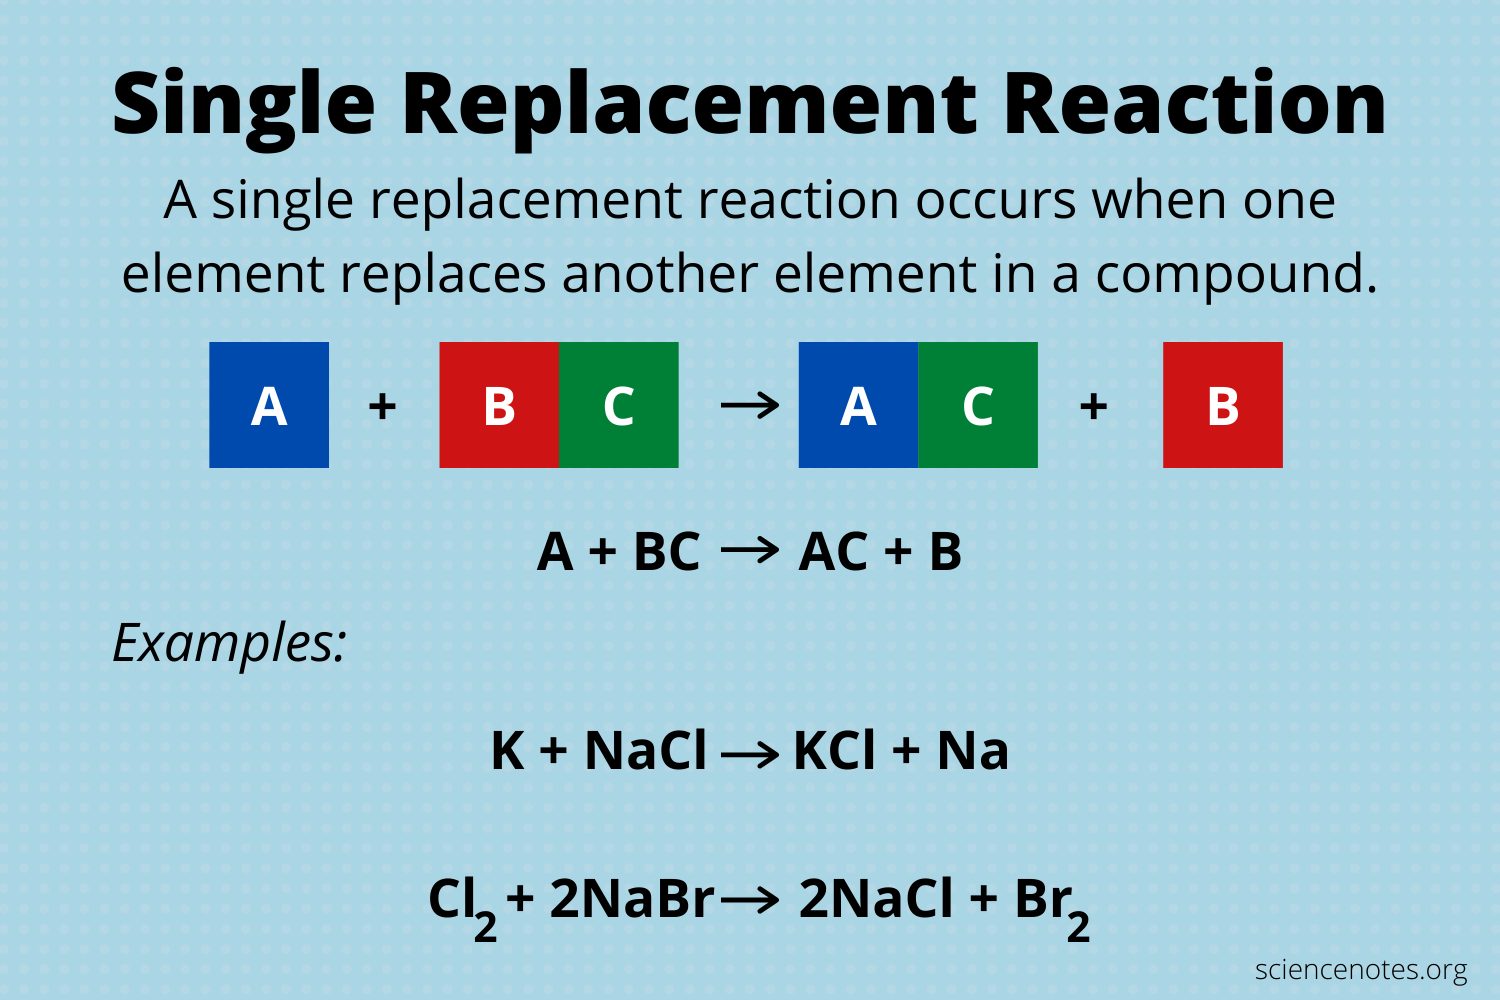 Single Replacement Reaction Definition and Examples